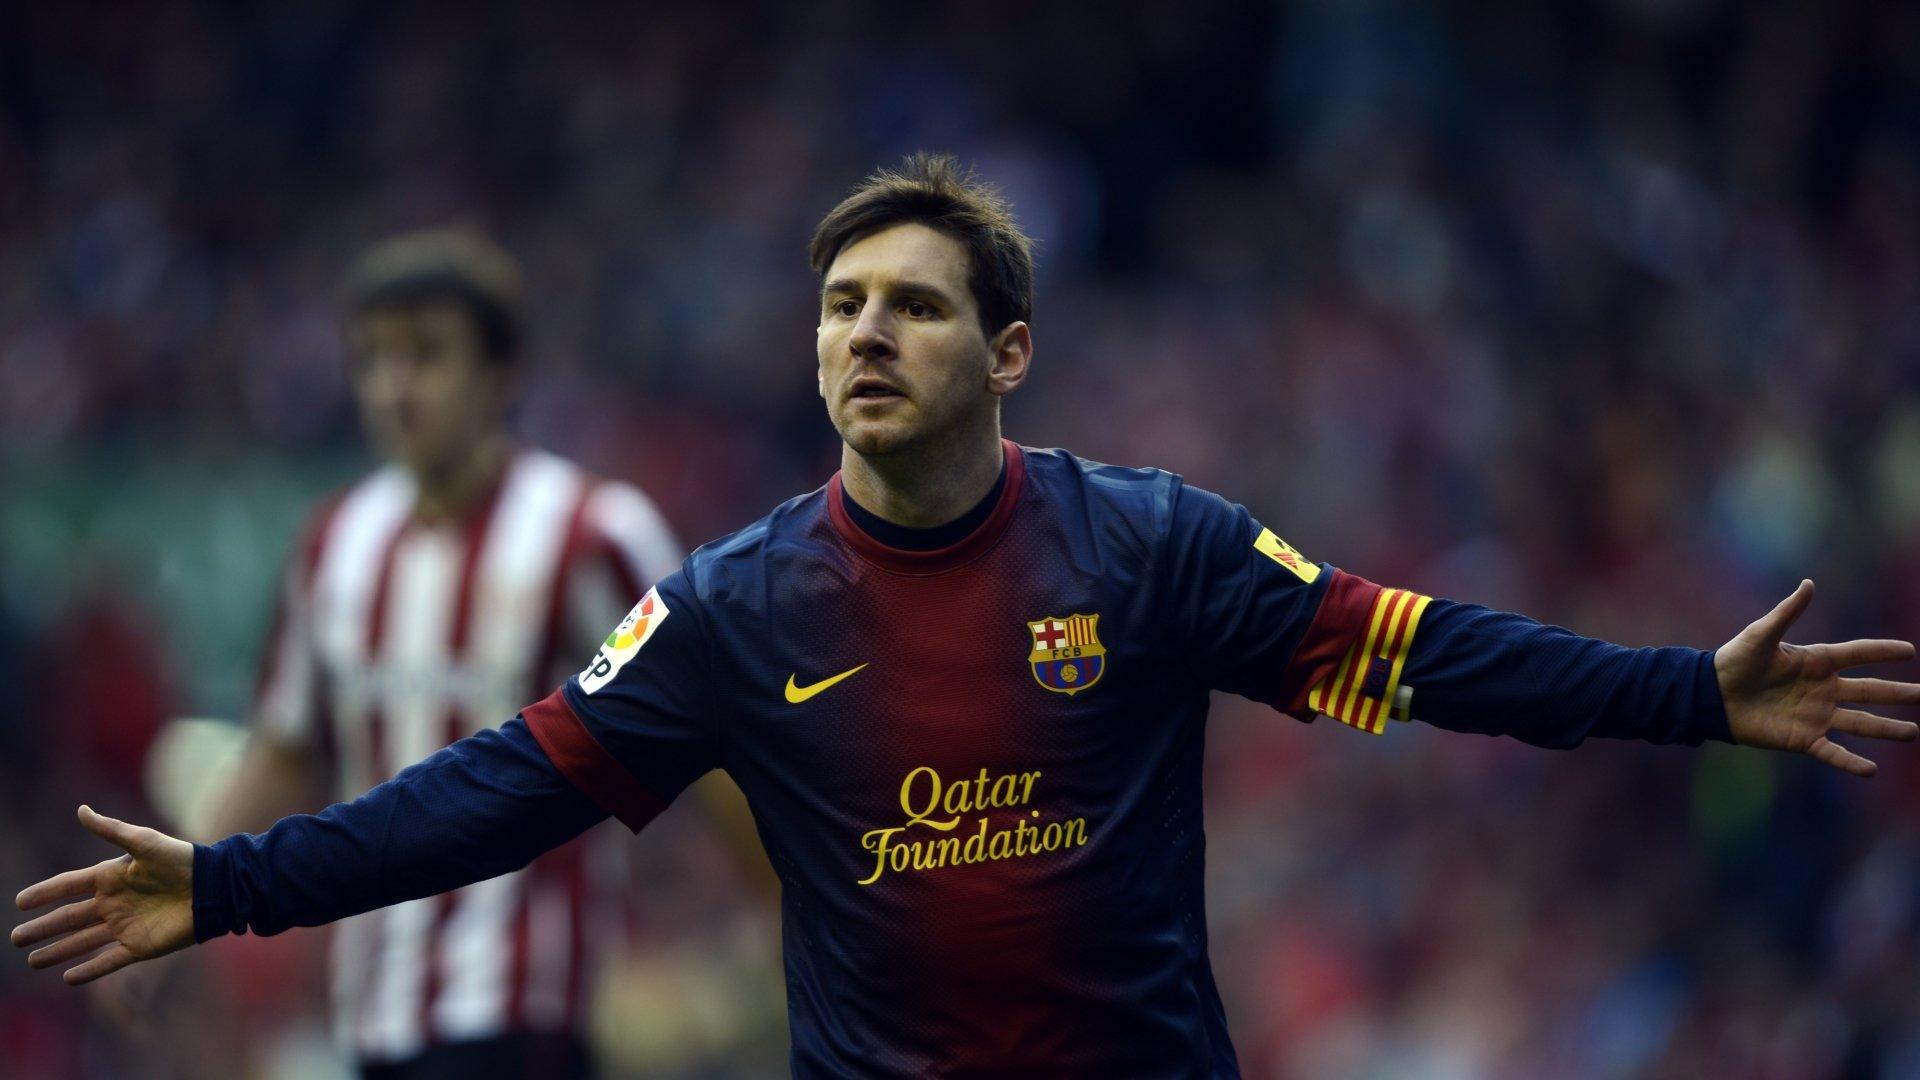 4K Ultra HD Lionel Messi Wallpaper and Background Image